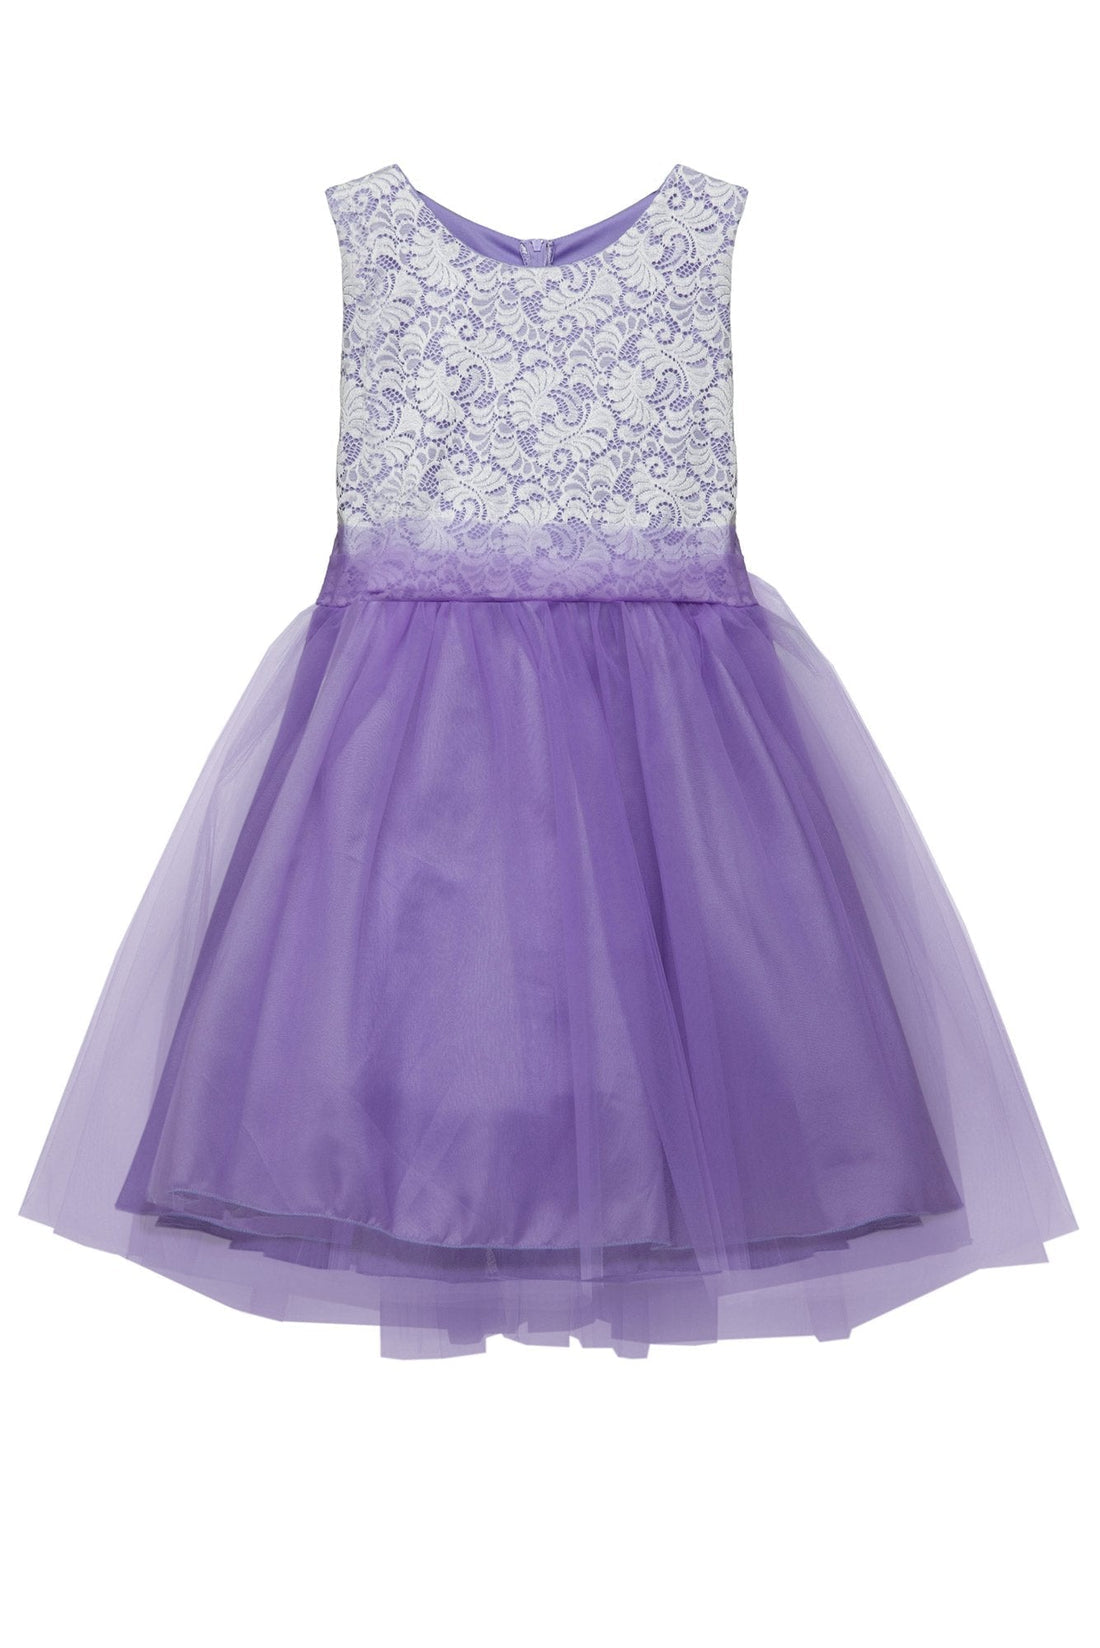 Stretch Lace Tulle Girl Party Dress Plus Size by AS420+ Kids Dream - Girl Formal Dresses